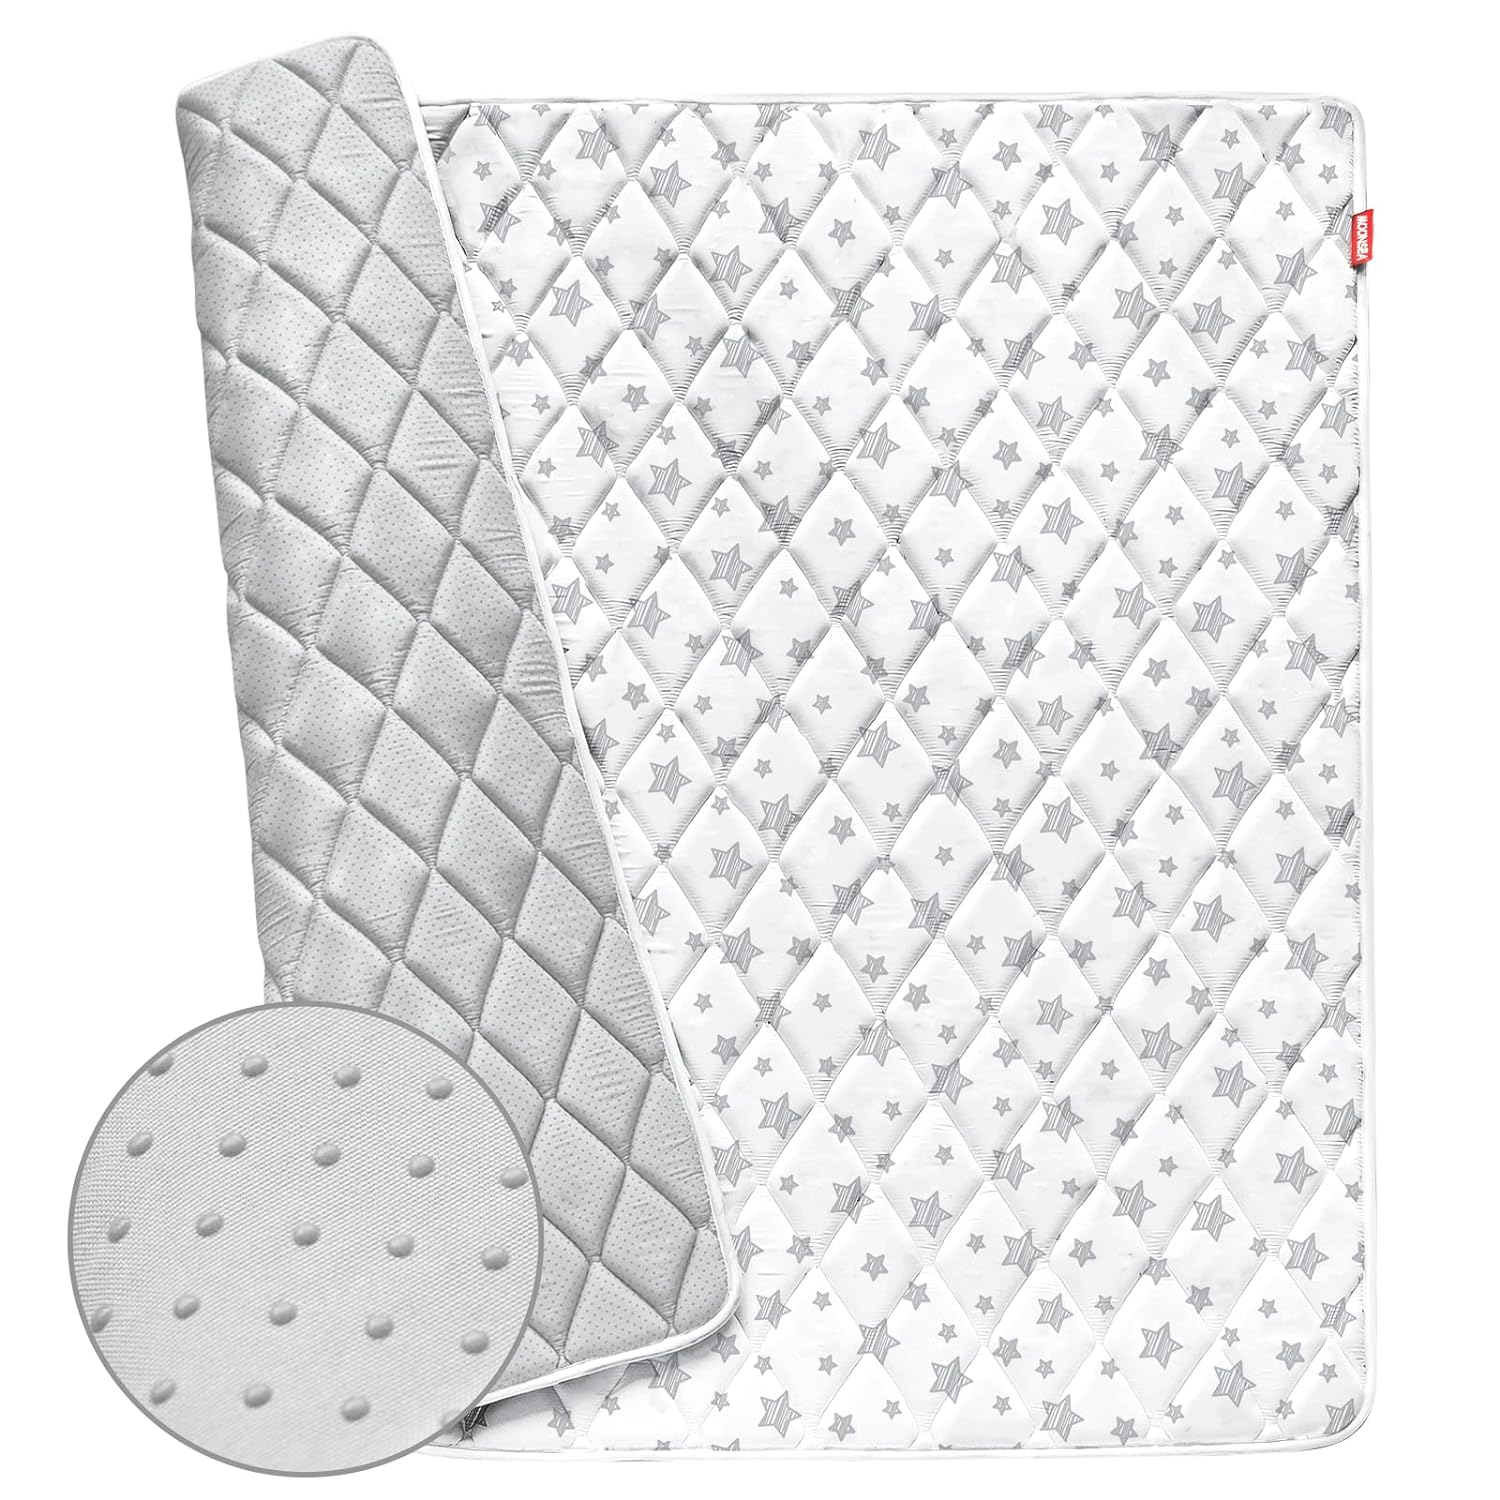 Premium Foam Baby Play Mat | Playpen Mat - Square 43" x 43", Thicker and Non-Toxic Crawling Mat for Infant & Toddler, White Star - Moonsea Bedding